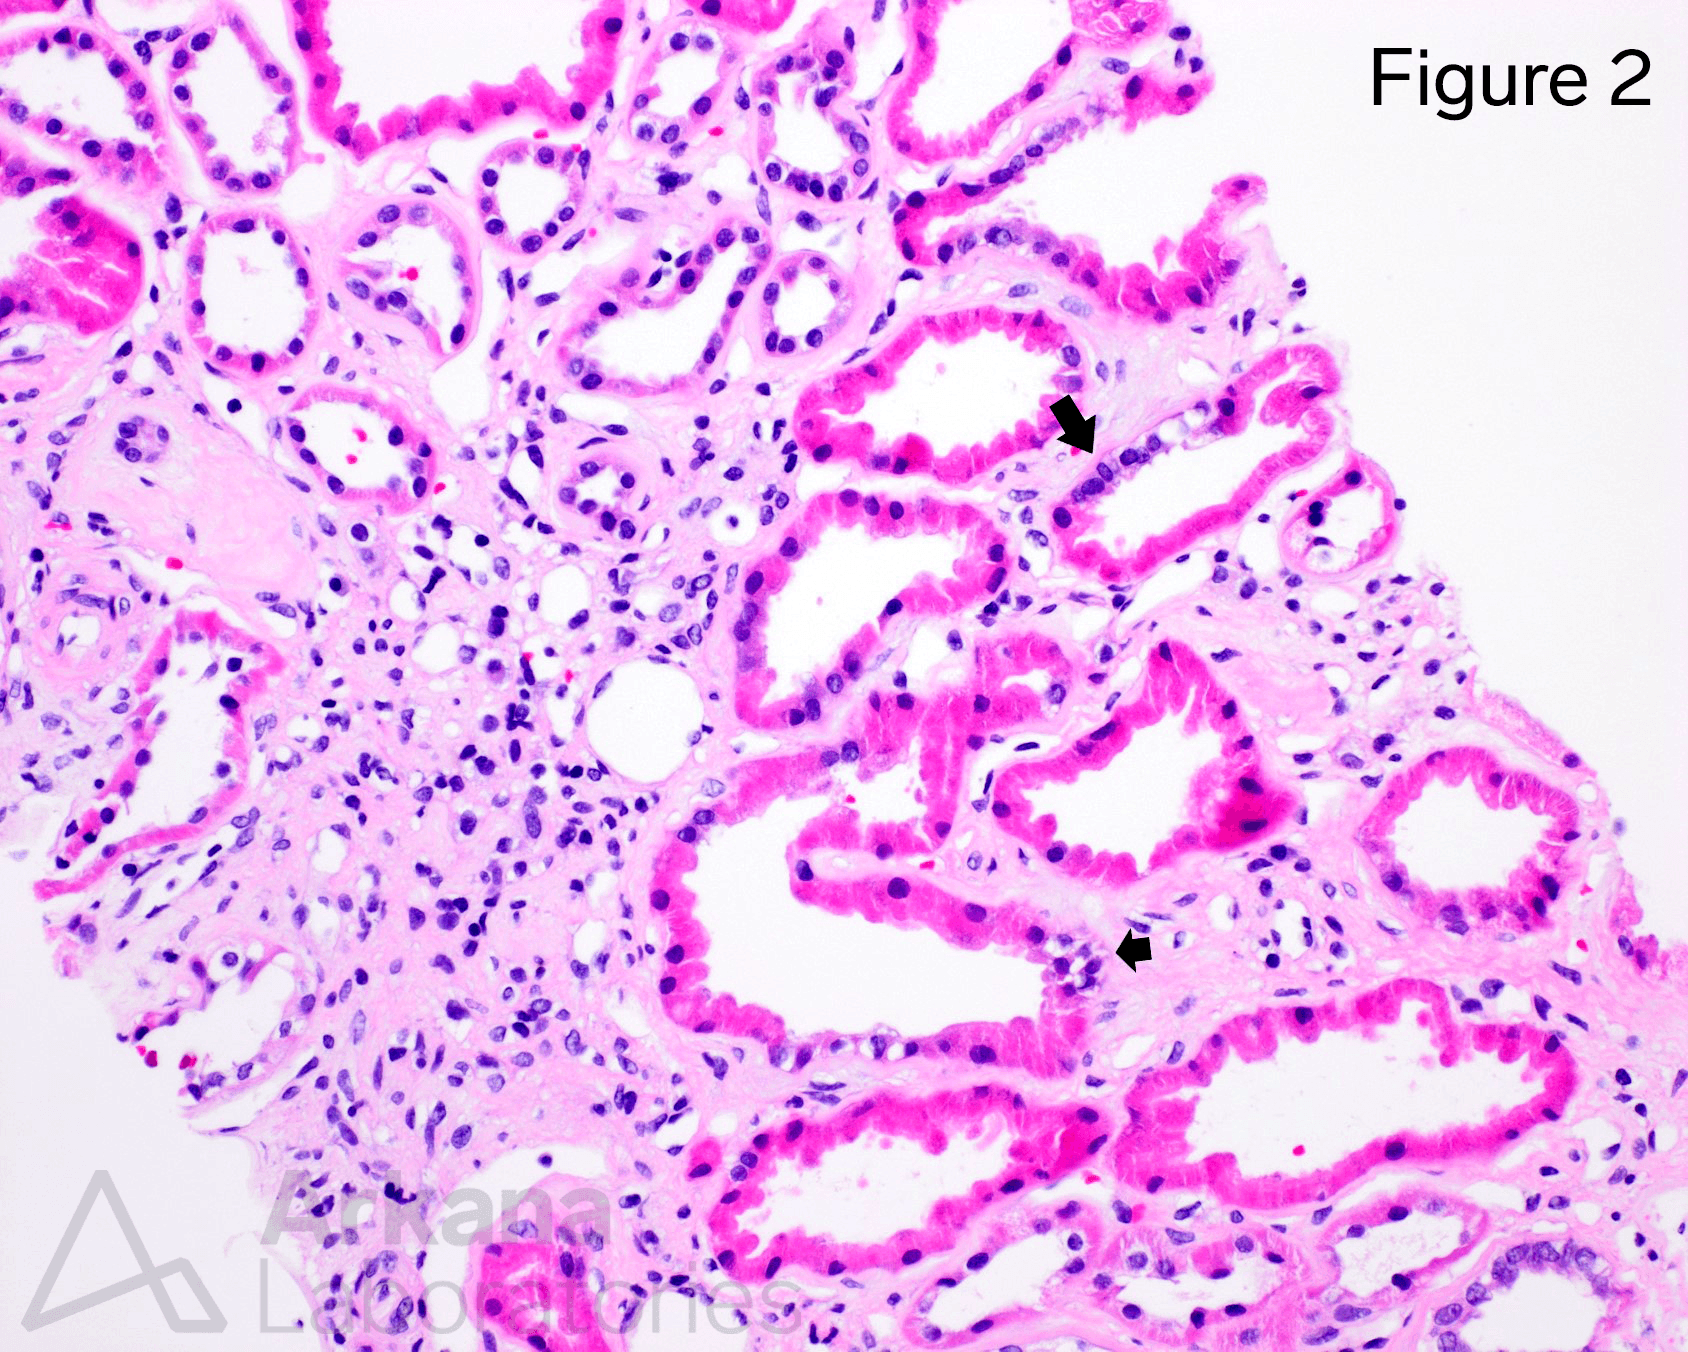 renal biopsy shows diffusely dilated tubules, with multidirectional branching, small diverticuli, and focal macula densa-like changes